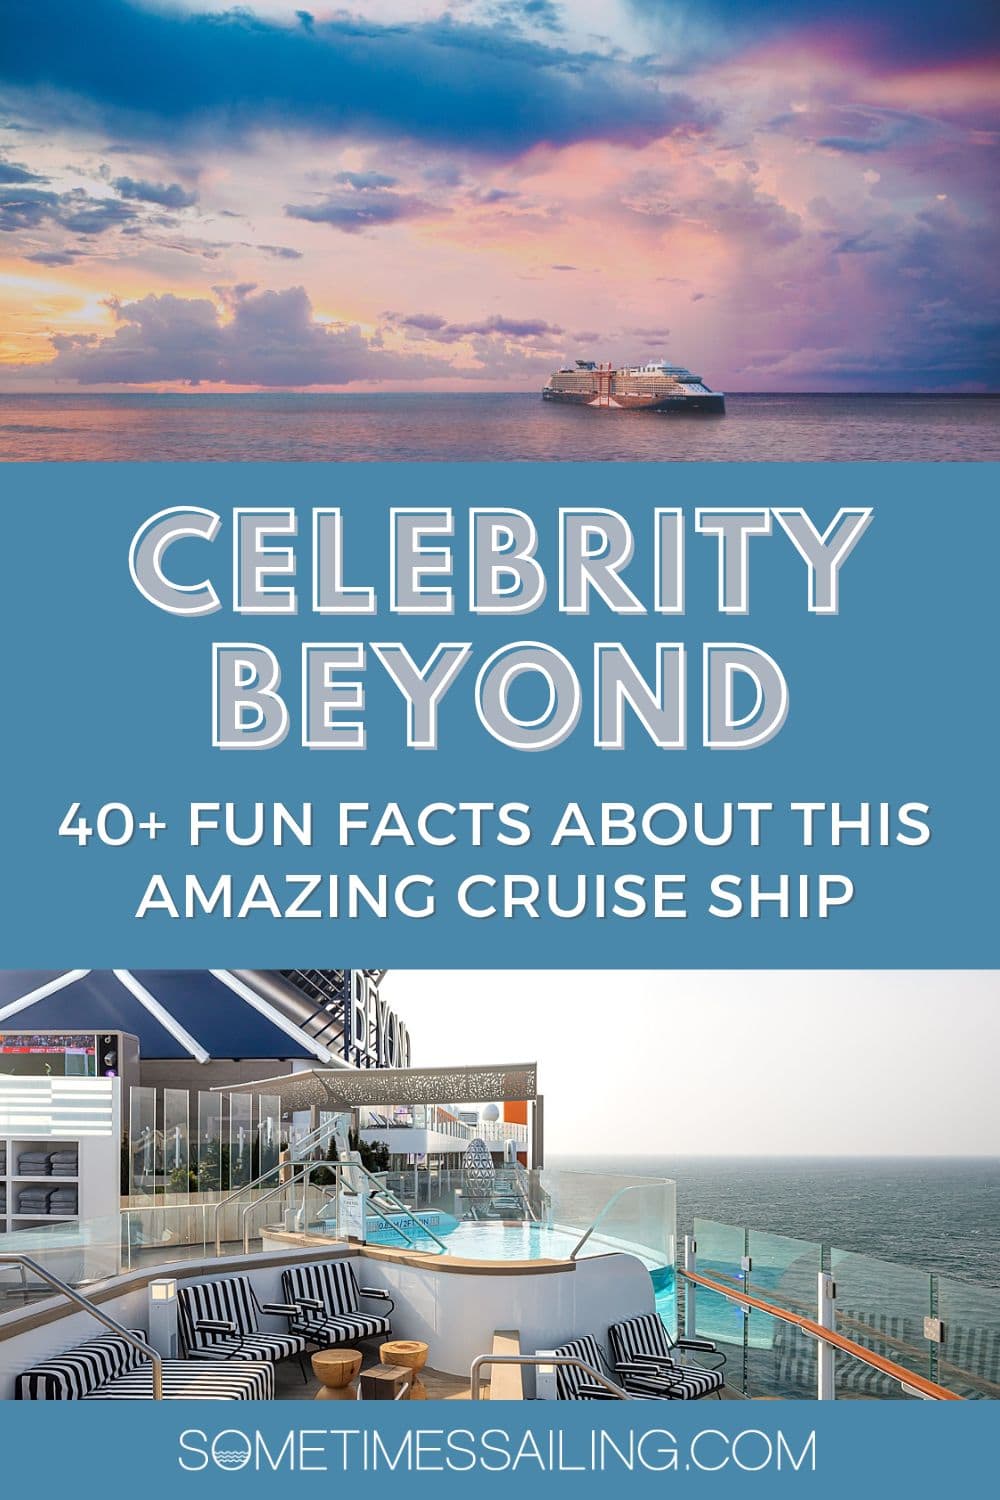 Celebrity Beyond: 40+ Fun Facts about this Amazing Cruise Ship, with a picture of the ship during a colorful sunset and close up of the sundeck.